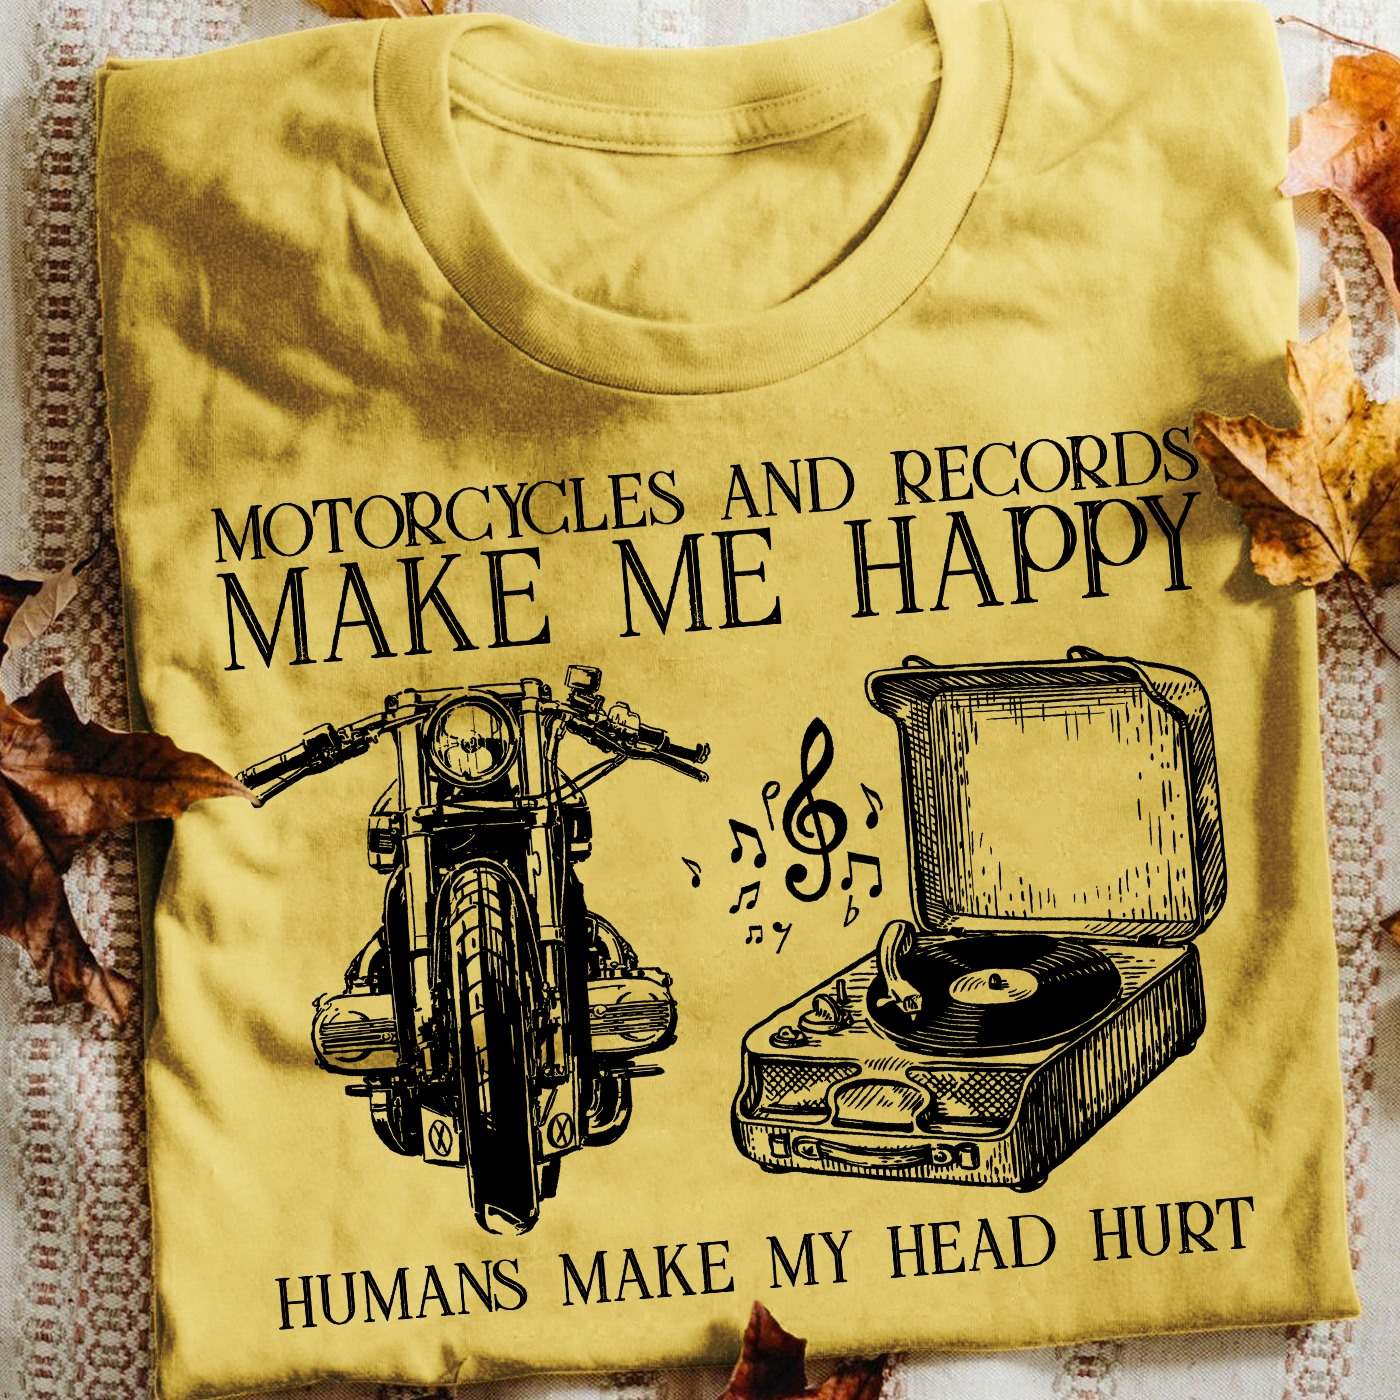 Motorcycles and records make me happy humans make my head hurt - Vinyl record